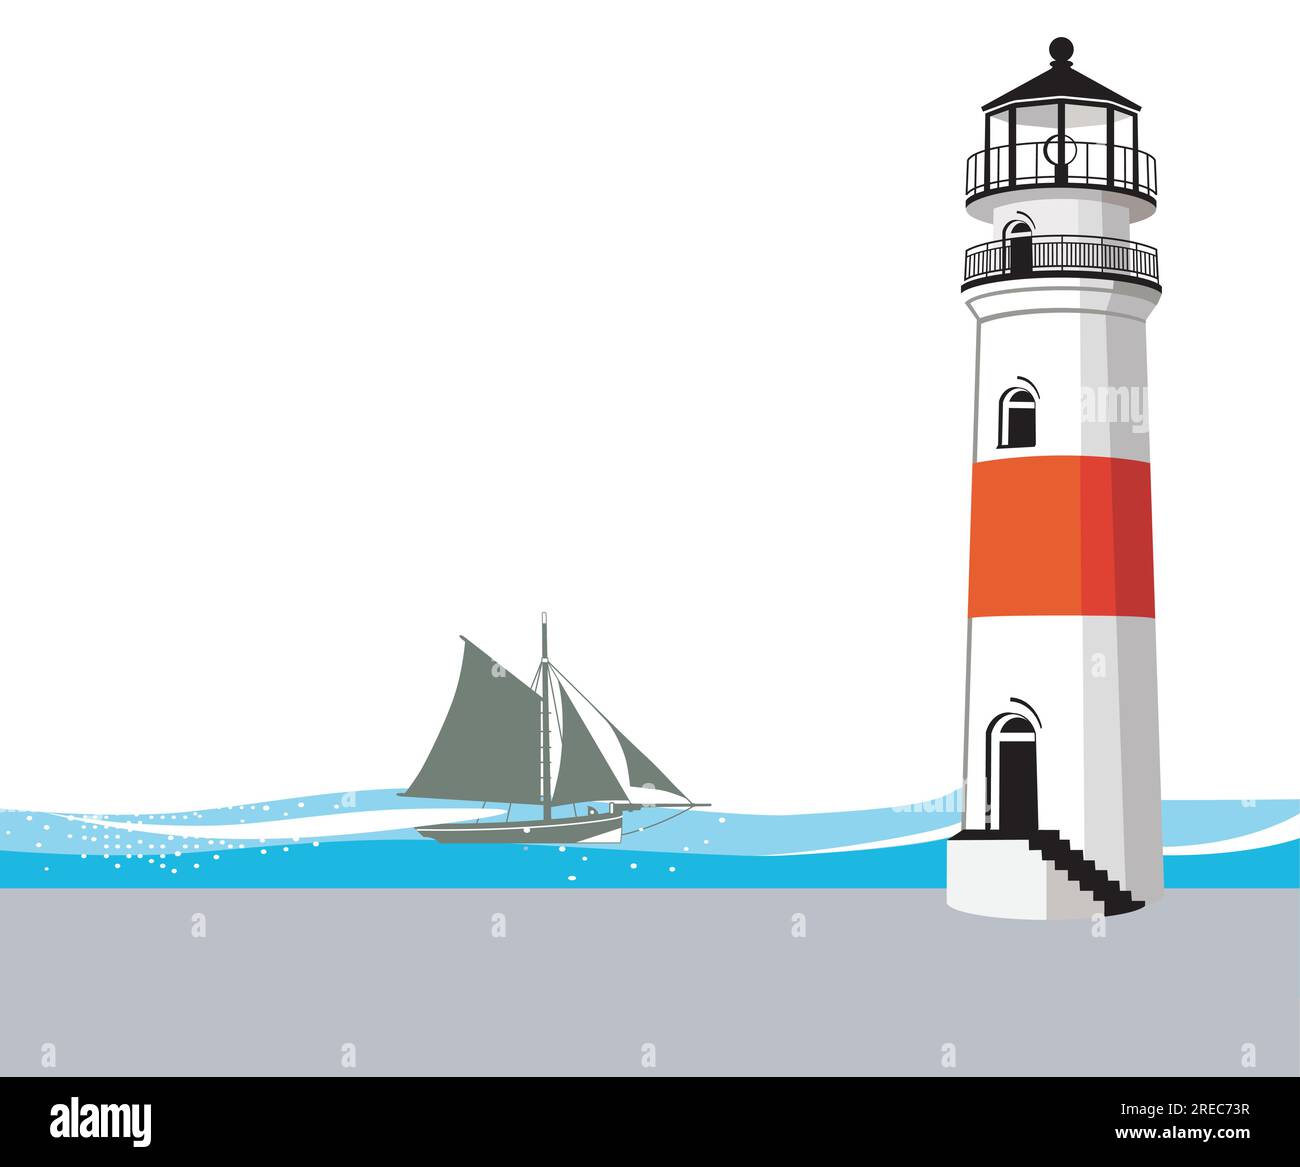 Lighthouse and sailing ship illustration Stock Vector